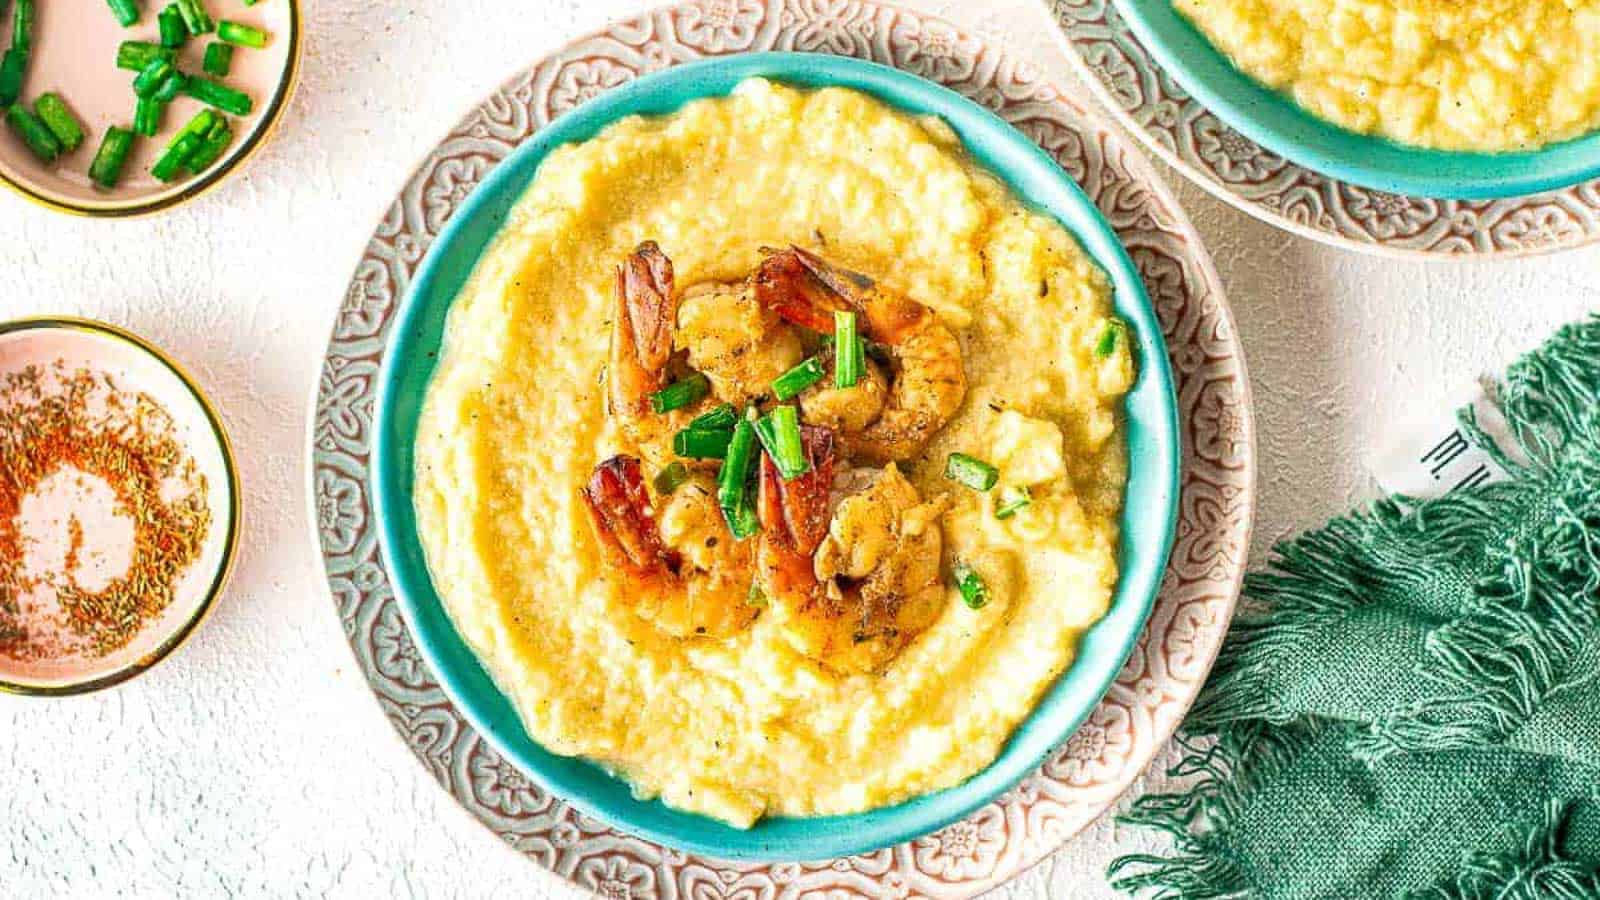 An overhead shot of a bowl of grits with shrimp on top.